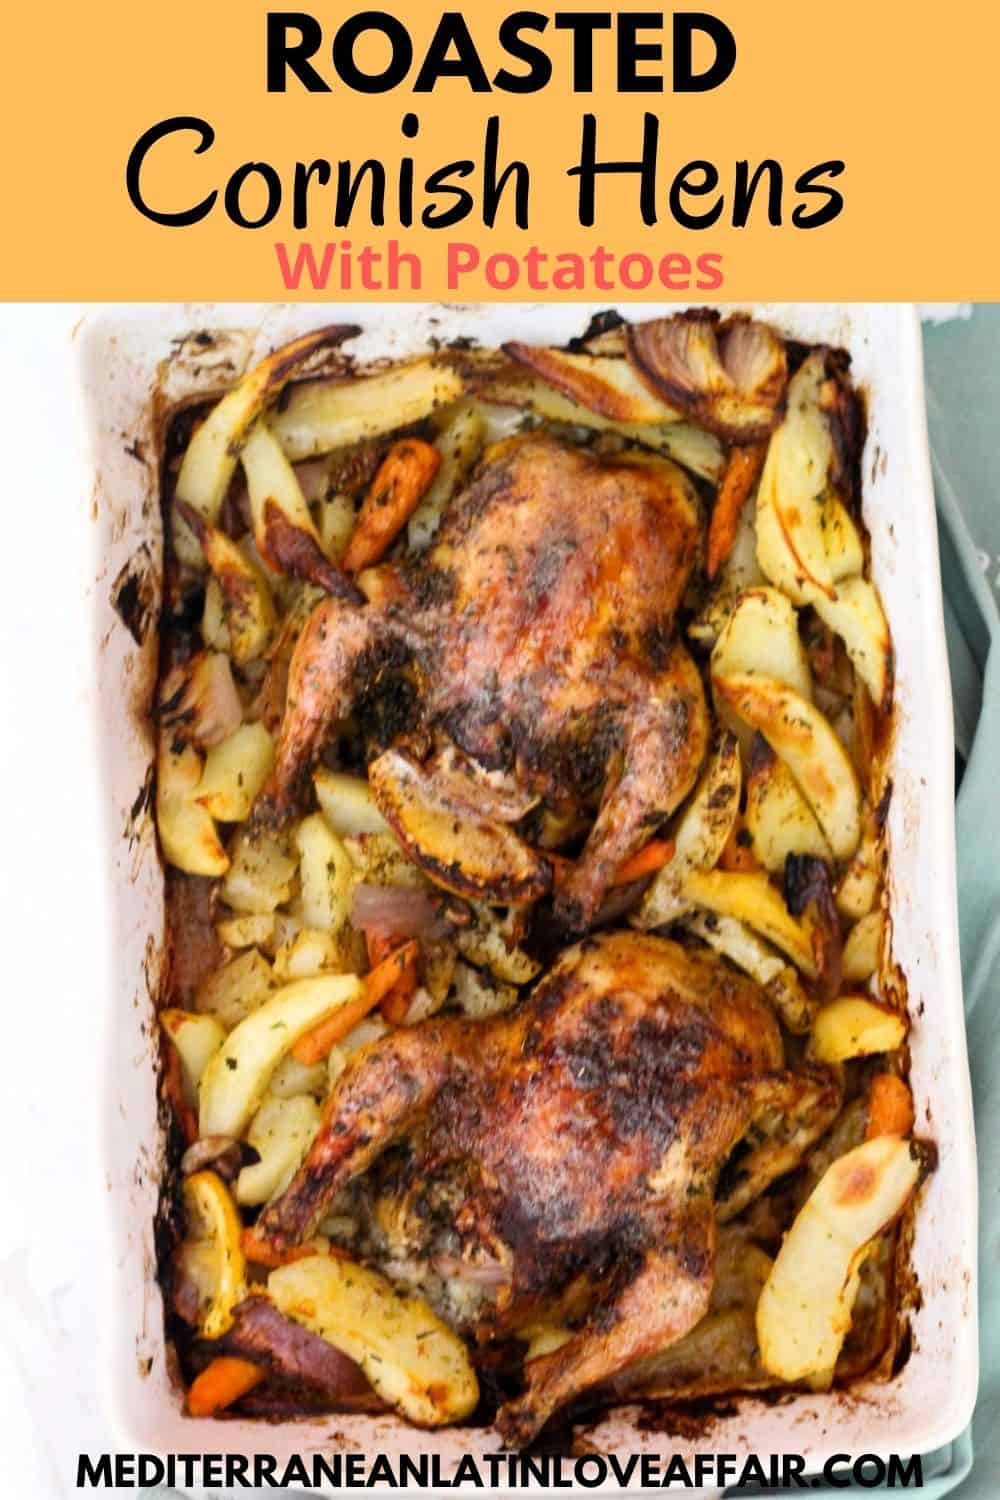 An image prepared for Pinterest, showing a baked dish cornish hens and potatoes, a title bar and a website link in the bottom.